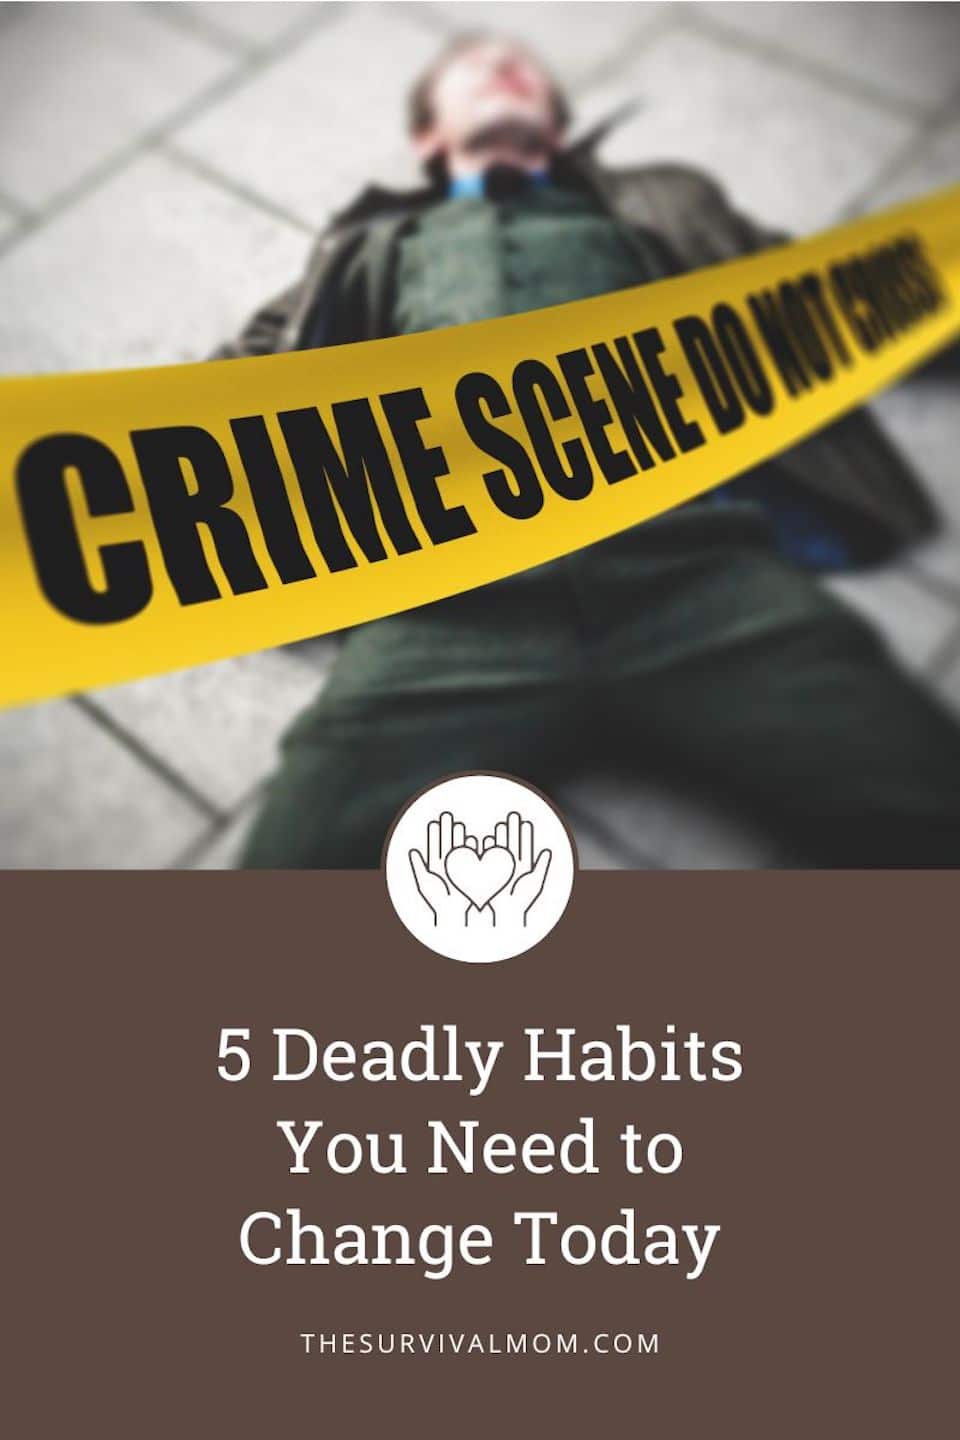 5 Deadly Habits You Need to Change Today